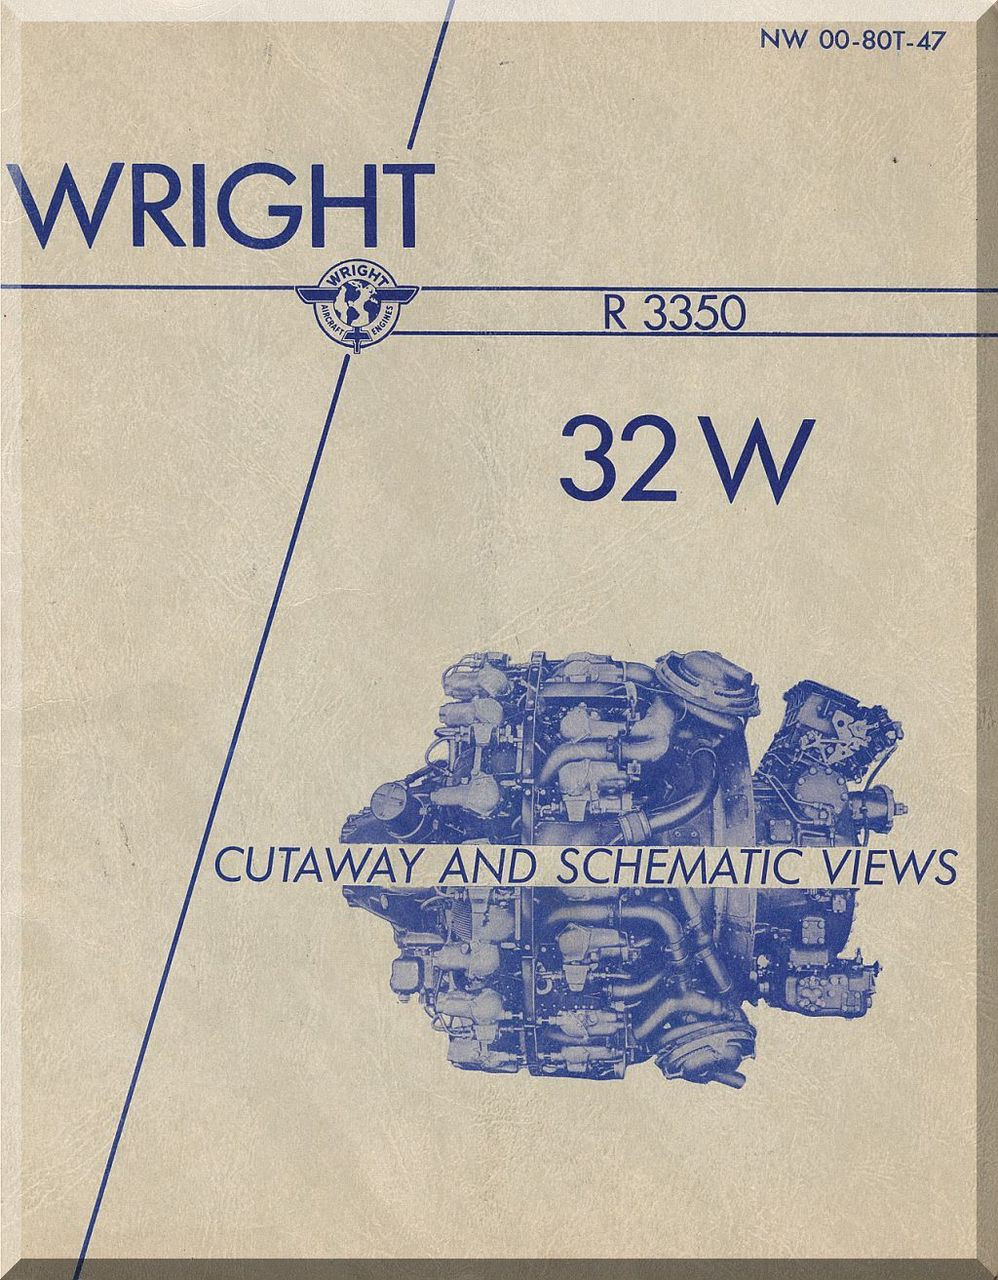 Wright R 3350 32 W Aircraft Engine Cutaway Manual Aircraft Reports Aircraft Manuals Aircraft Helicopter Engines Propellers Blueprints Publications